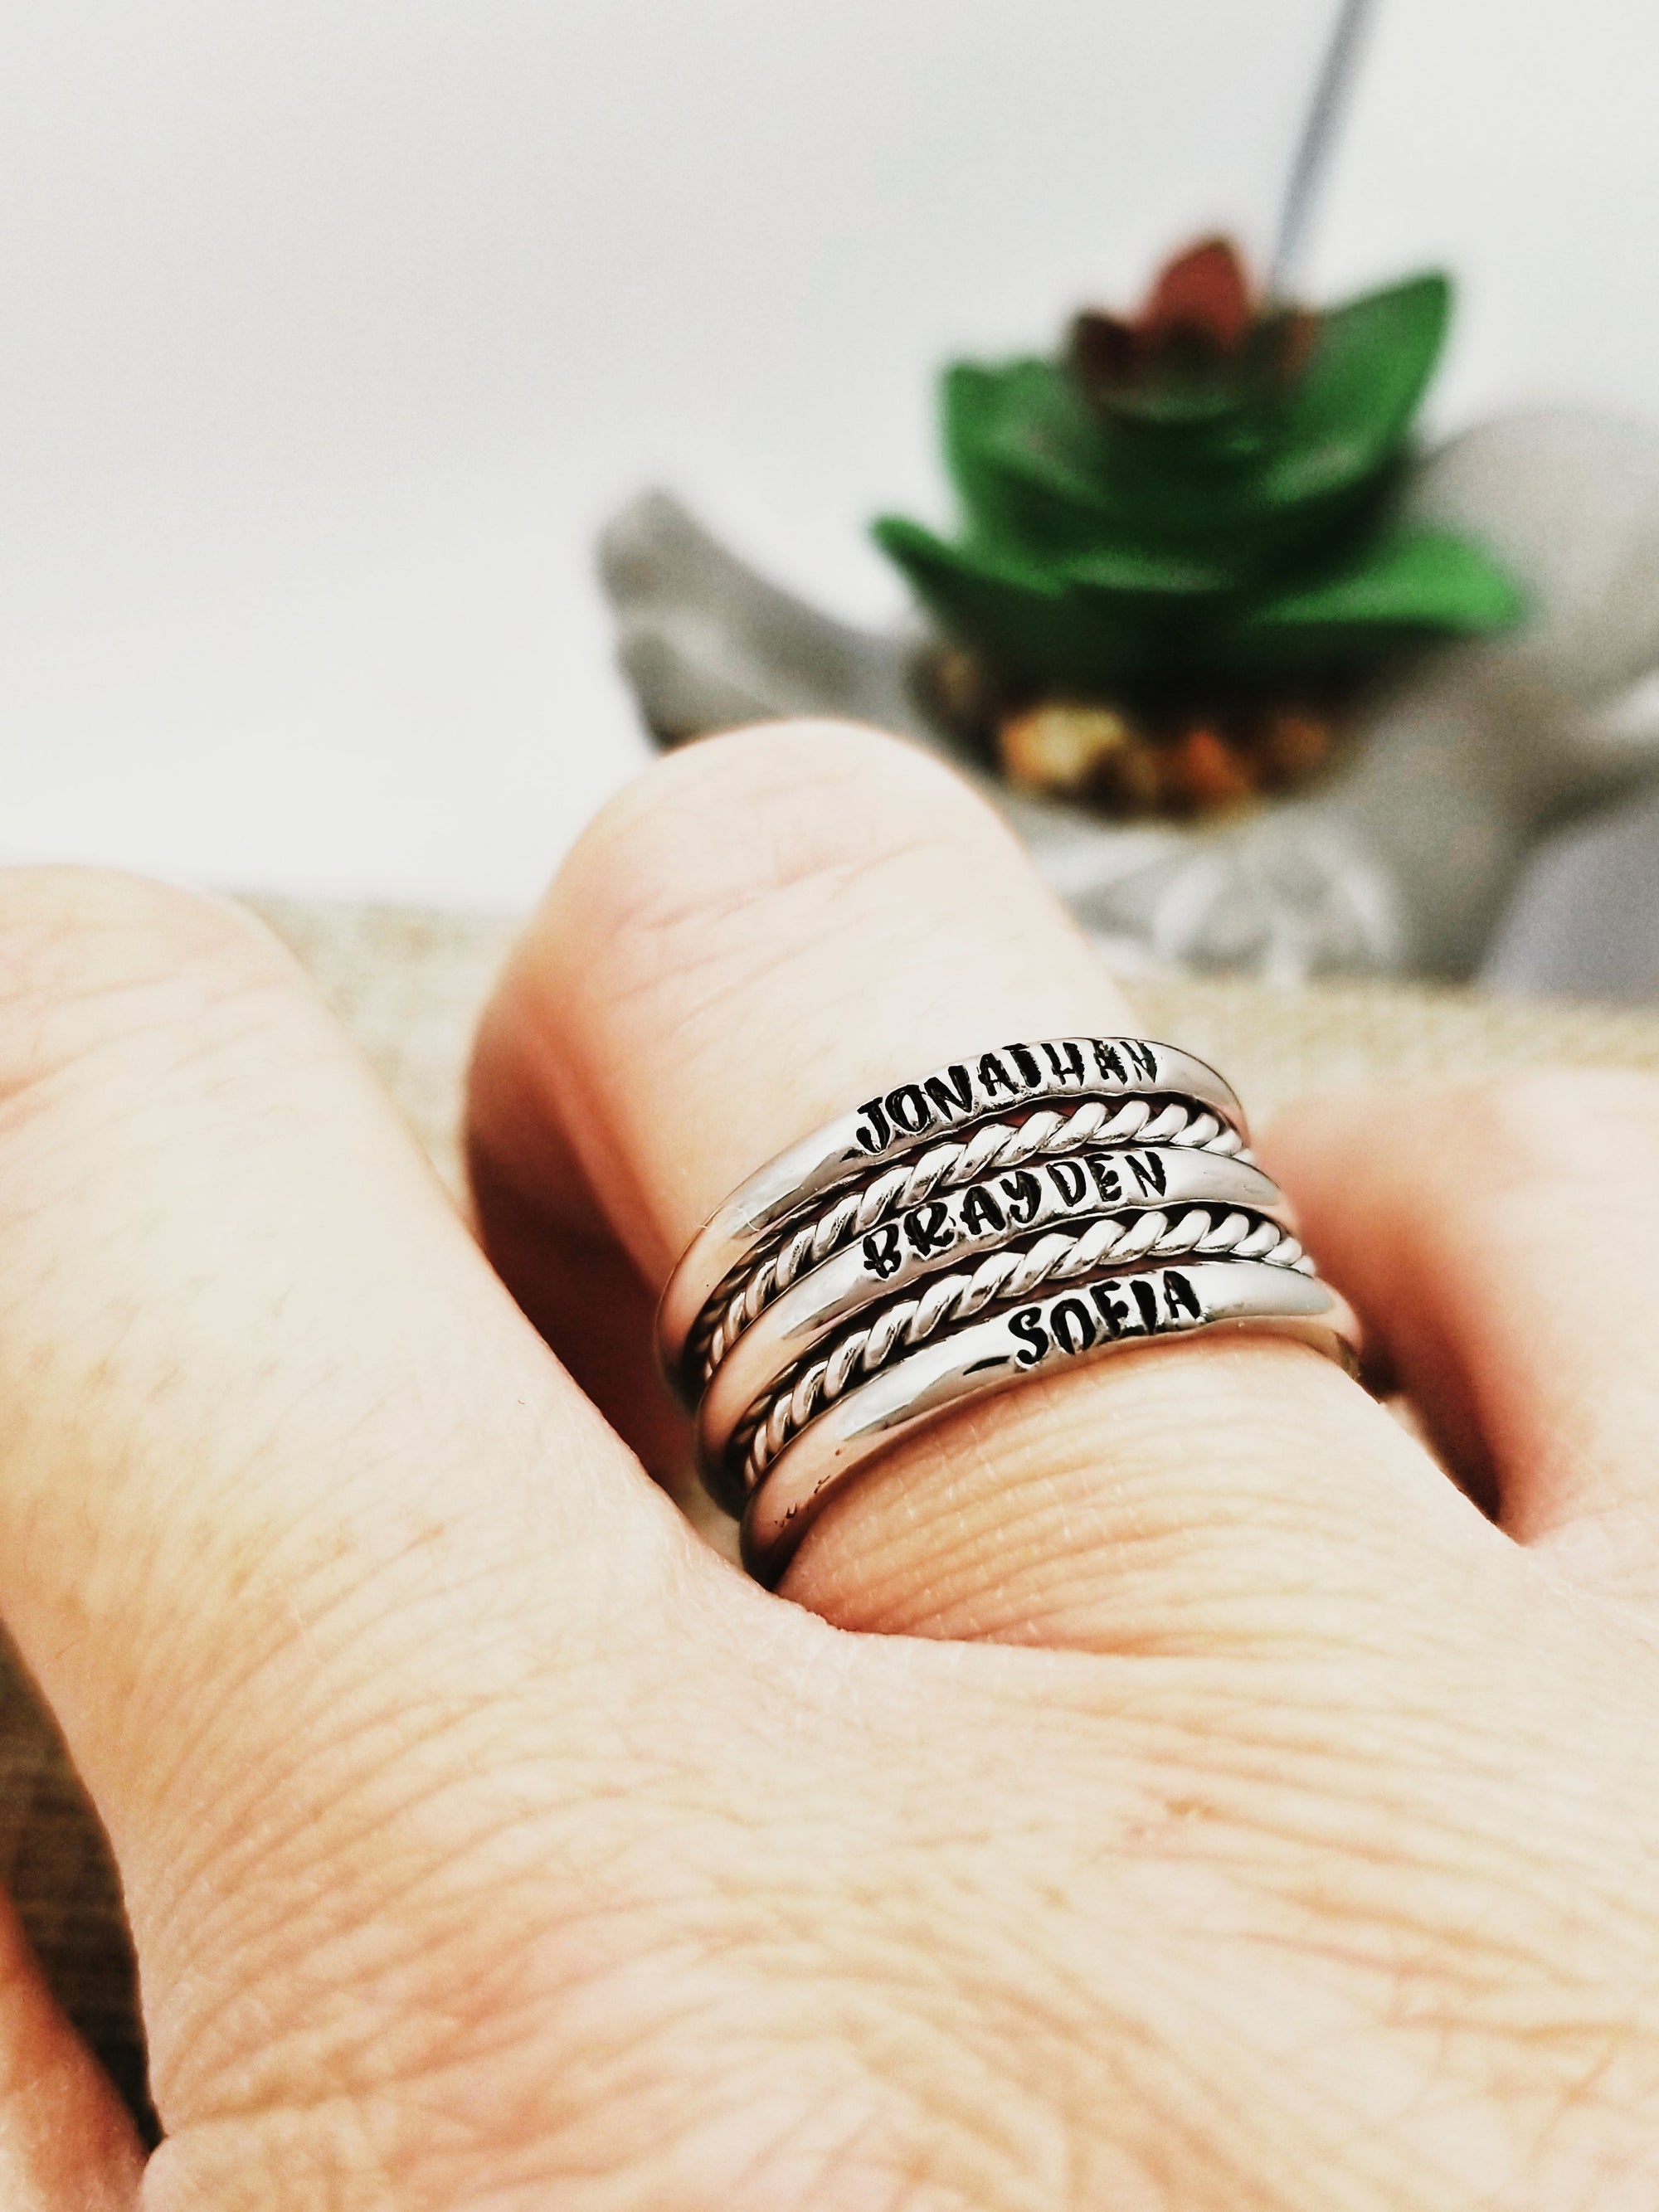 Tiny Roman Numeral Rings, Custom Hand Stamped Rings, Personalized Gift, Eternity rings, Stainless Steel